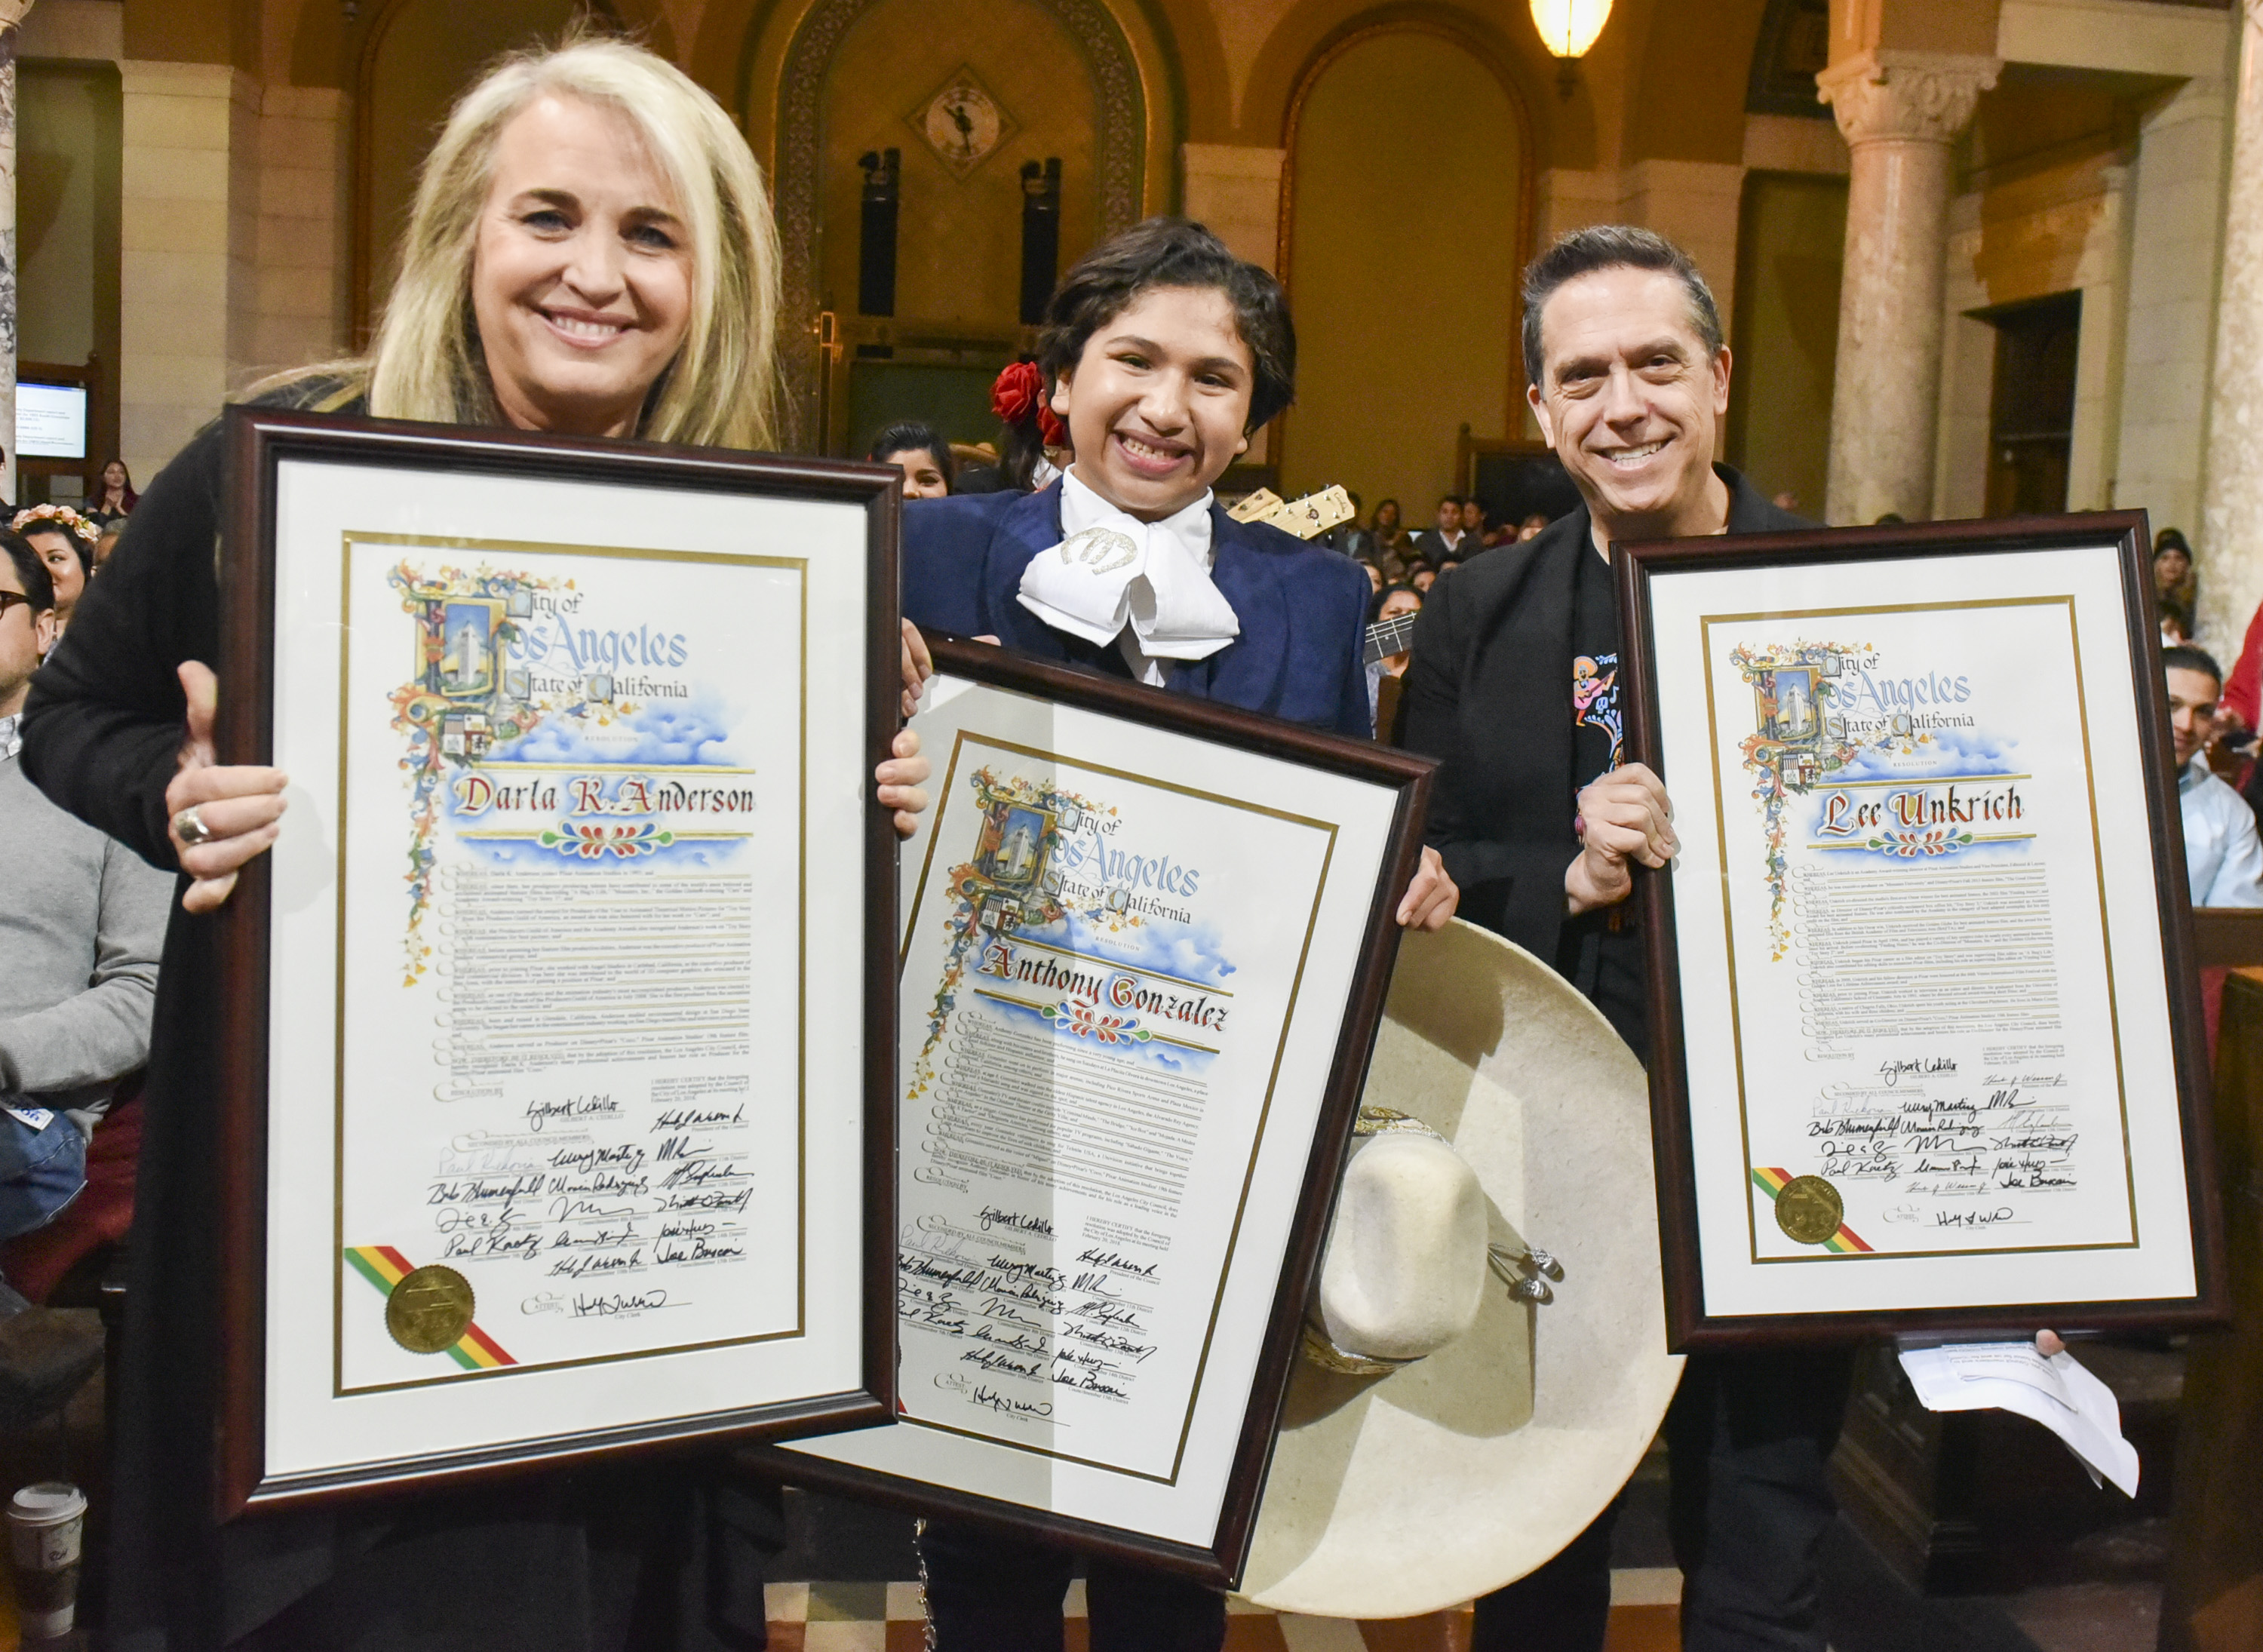 Los Angeles Celebrates Disney And Pixar's "Coco" By Declaring February 27 "Coco Day"